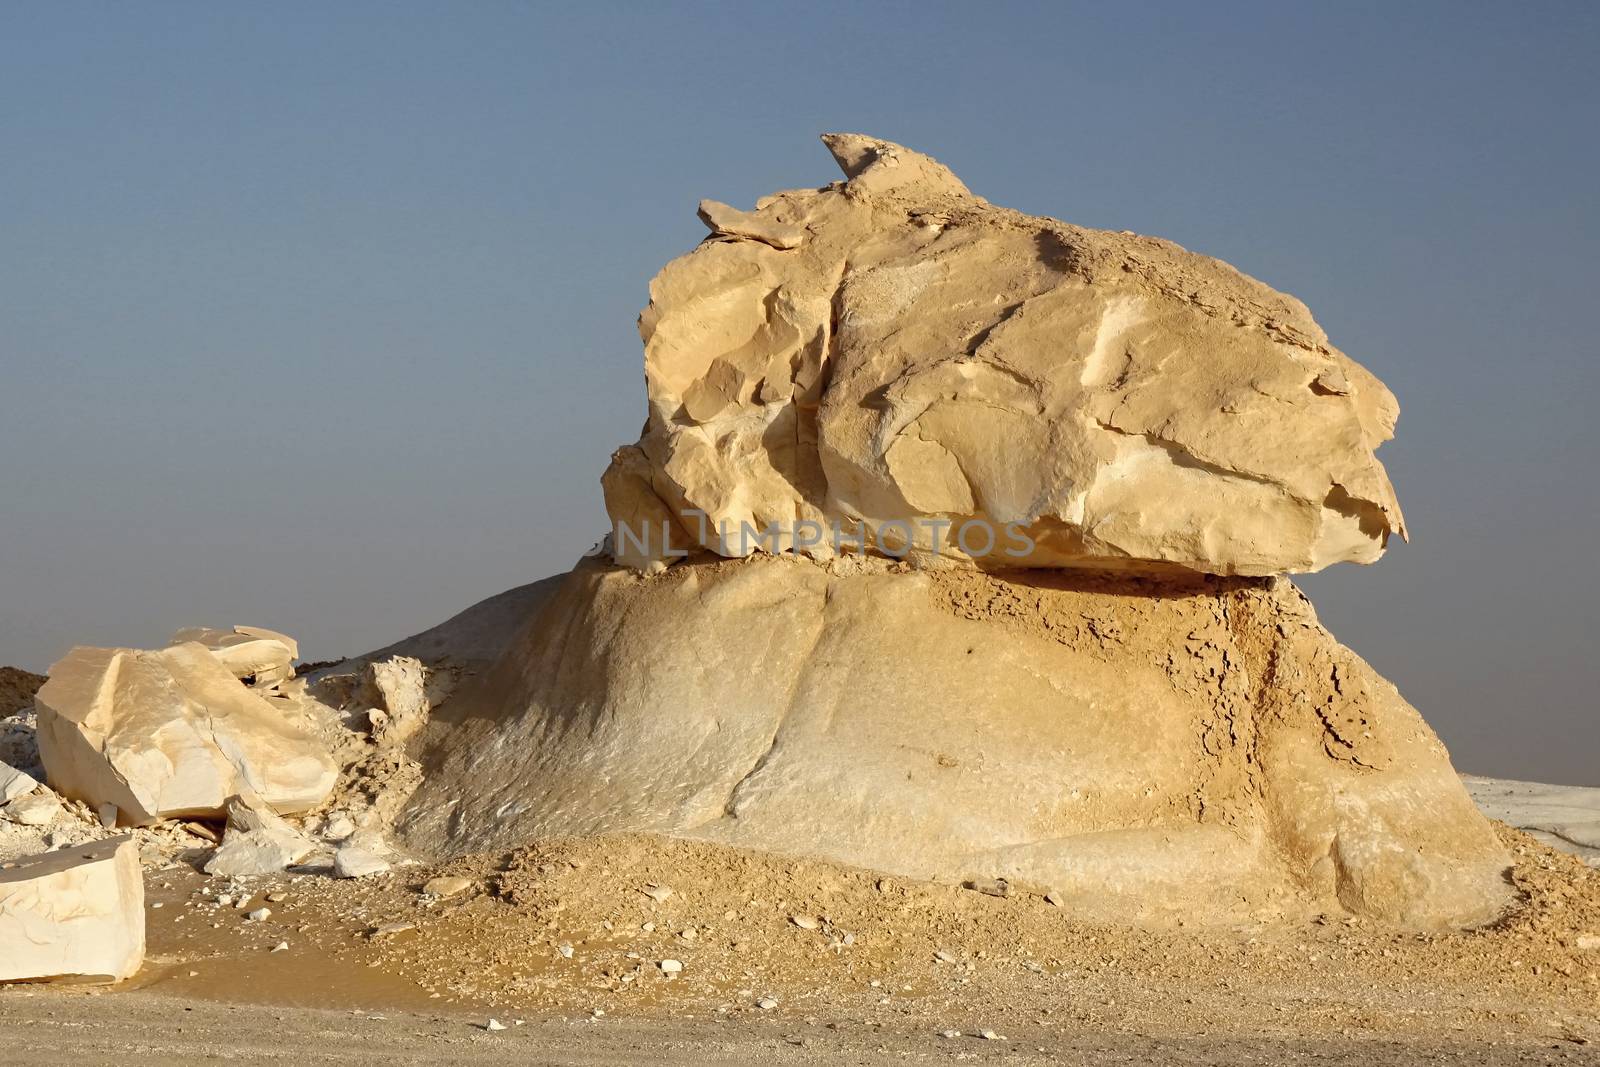 Sand stone formation in white desert by jnerad